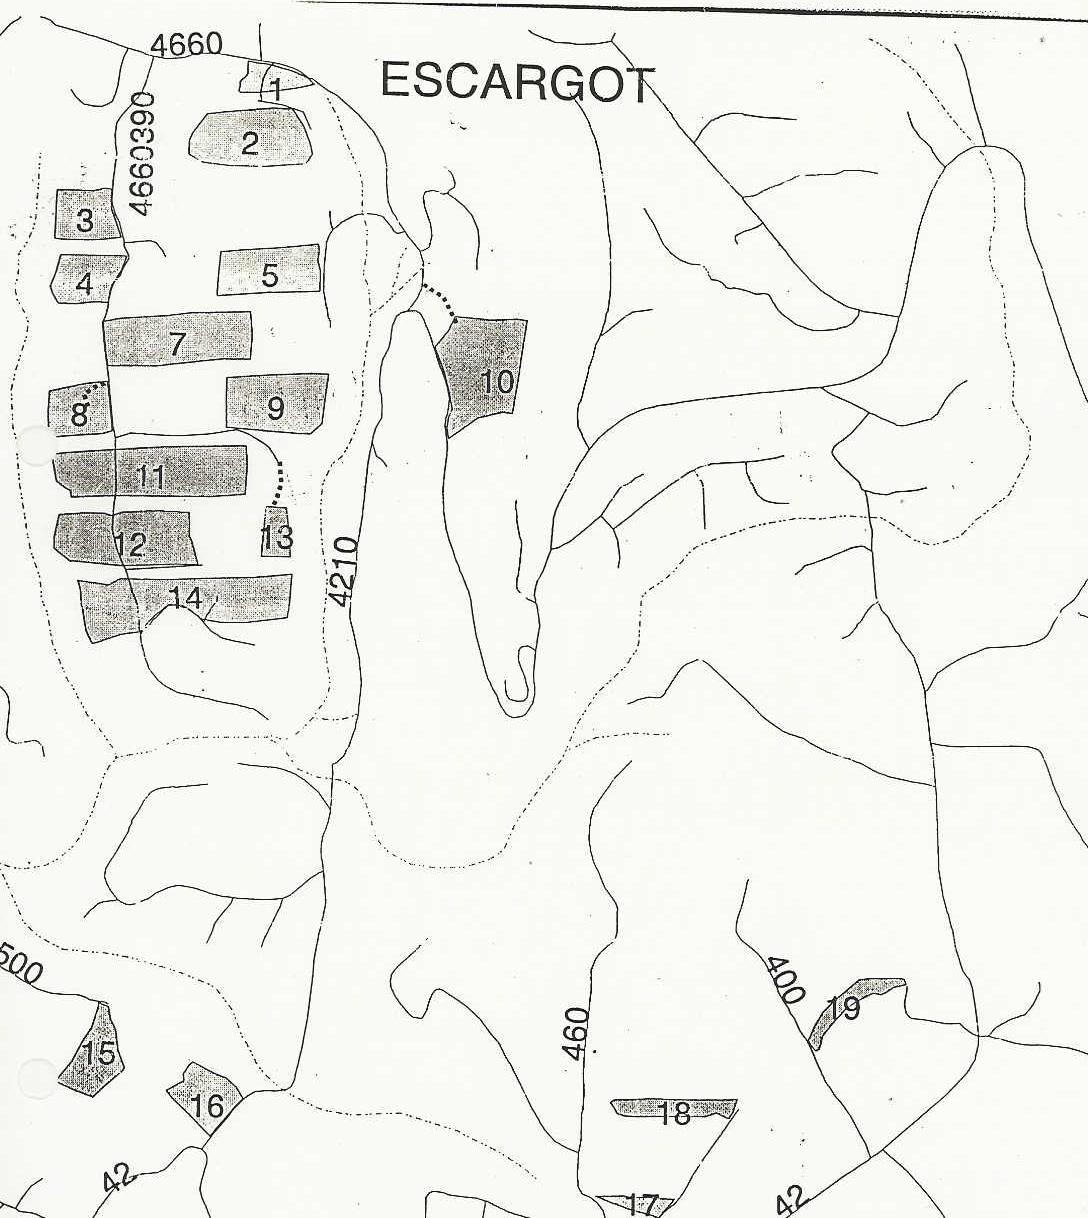 This is a black and white scanned map of the Escargot Timber Sale. There are blocks designating units within the sale.